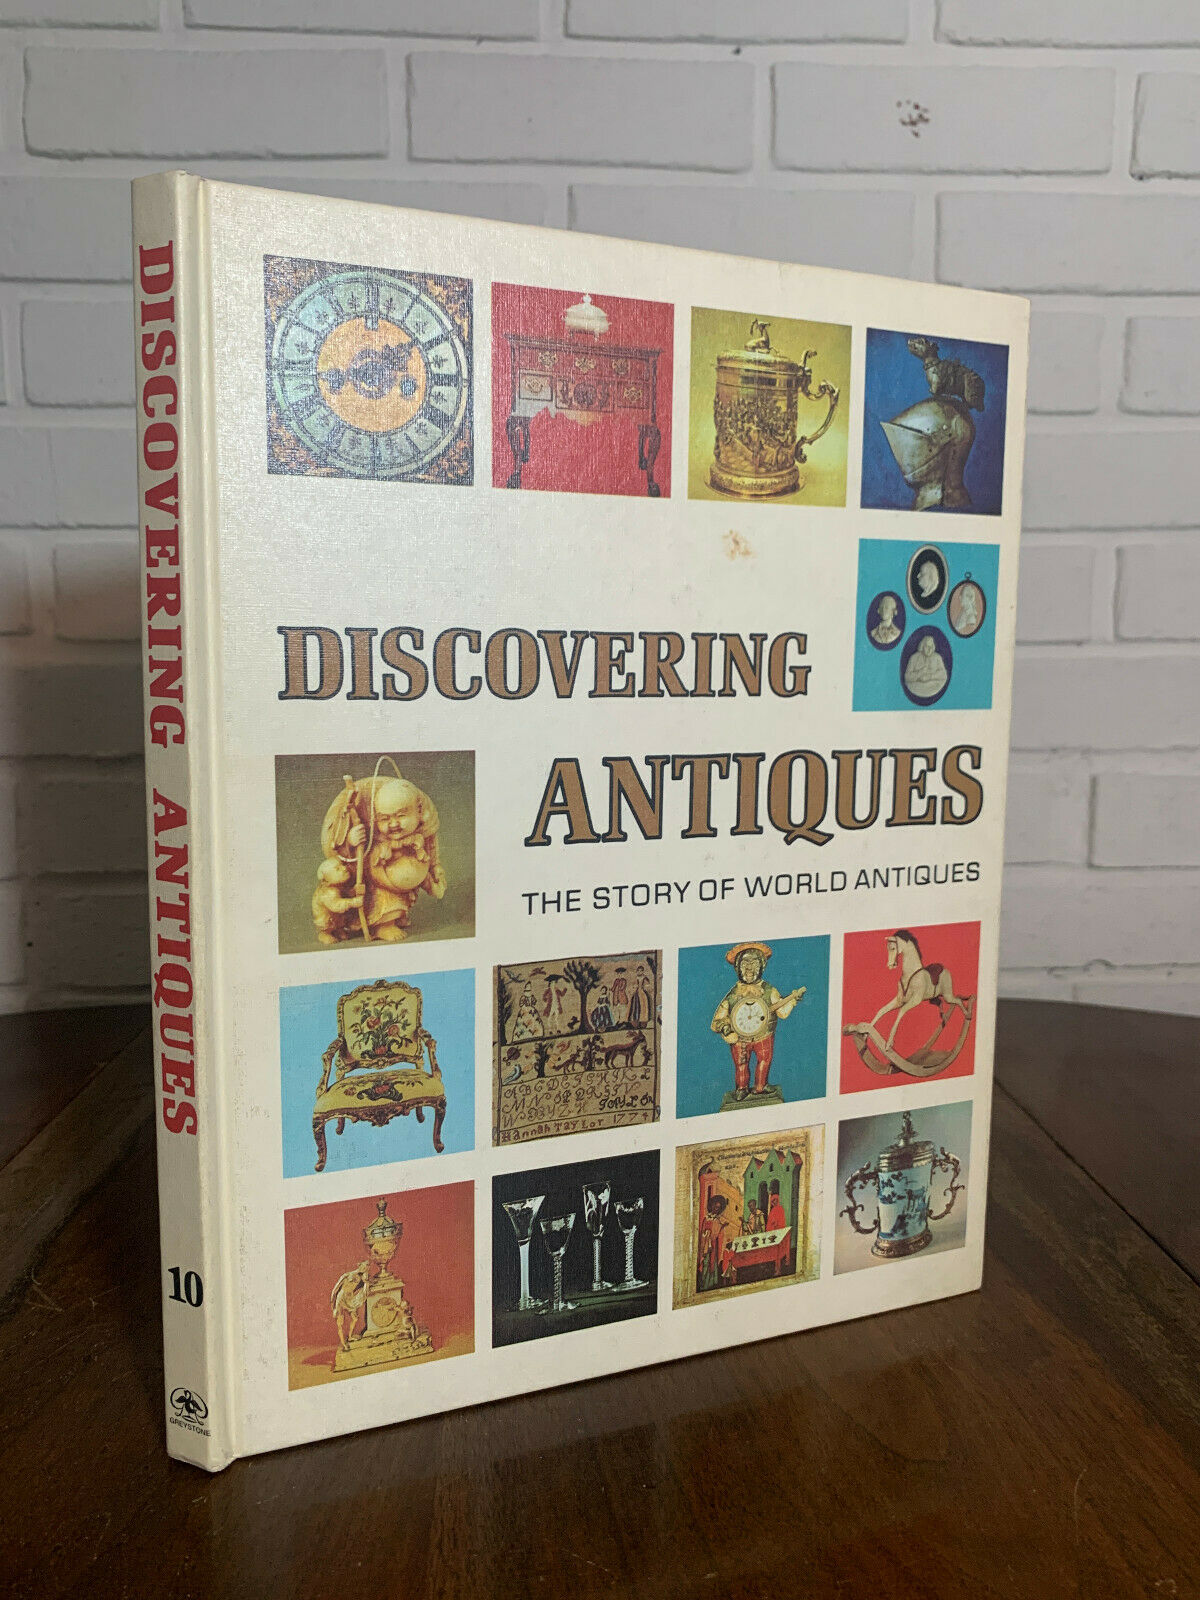 Discovering Antiques The Story of World Antiques Volume 10 (1972-1973)